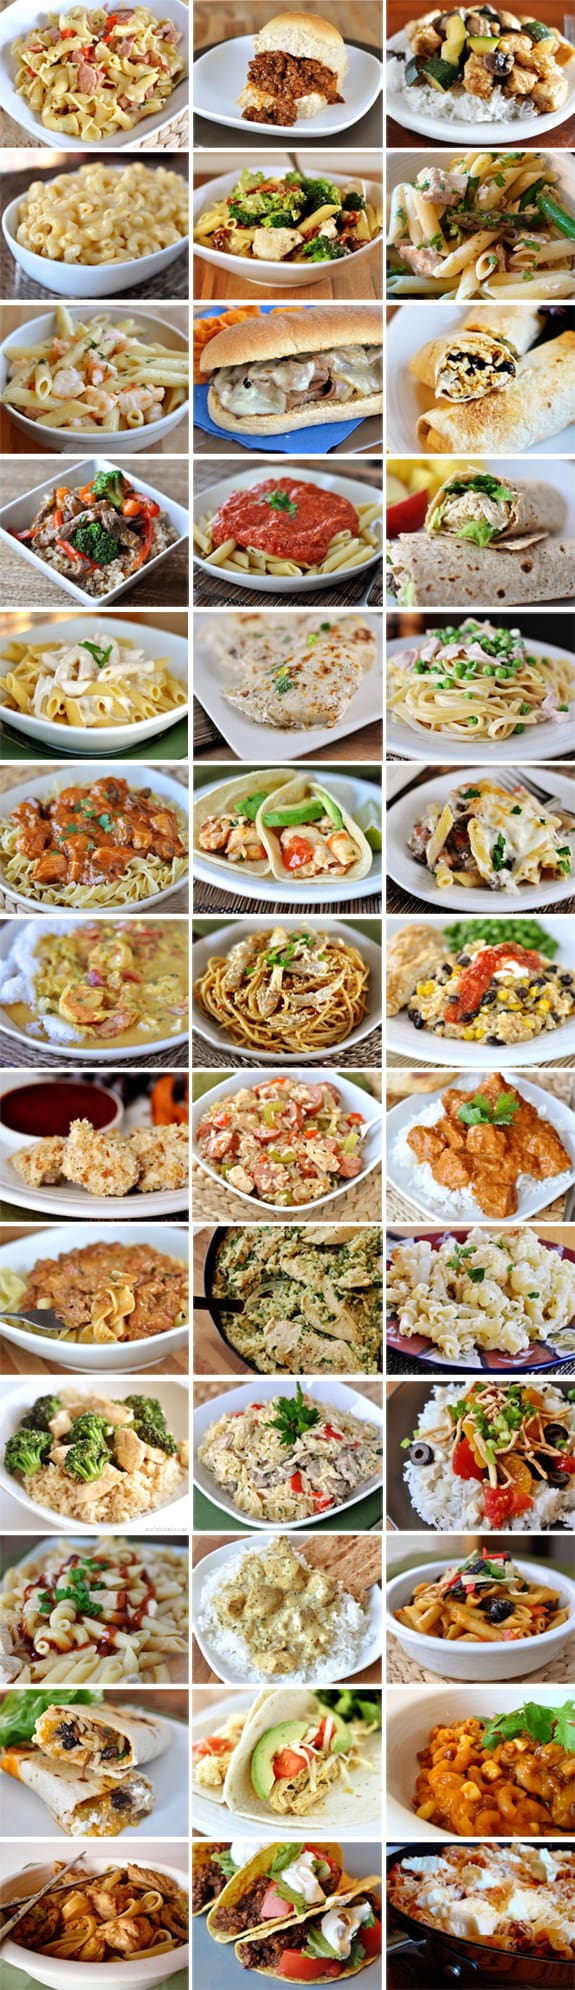 Download this Quick Meals Collage picture